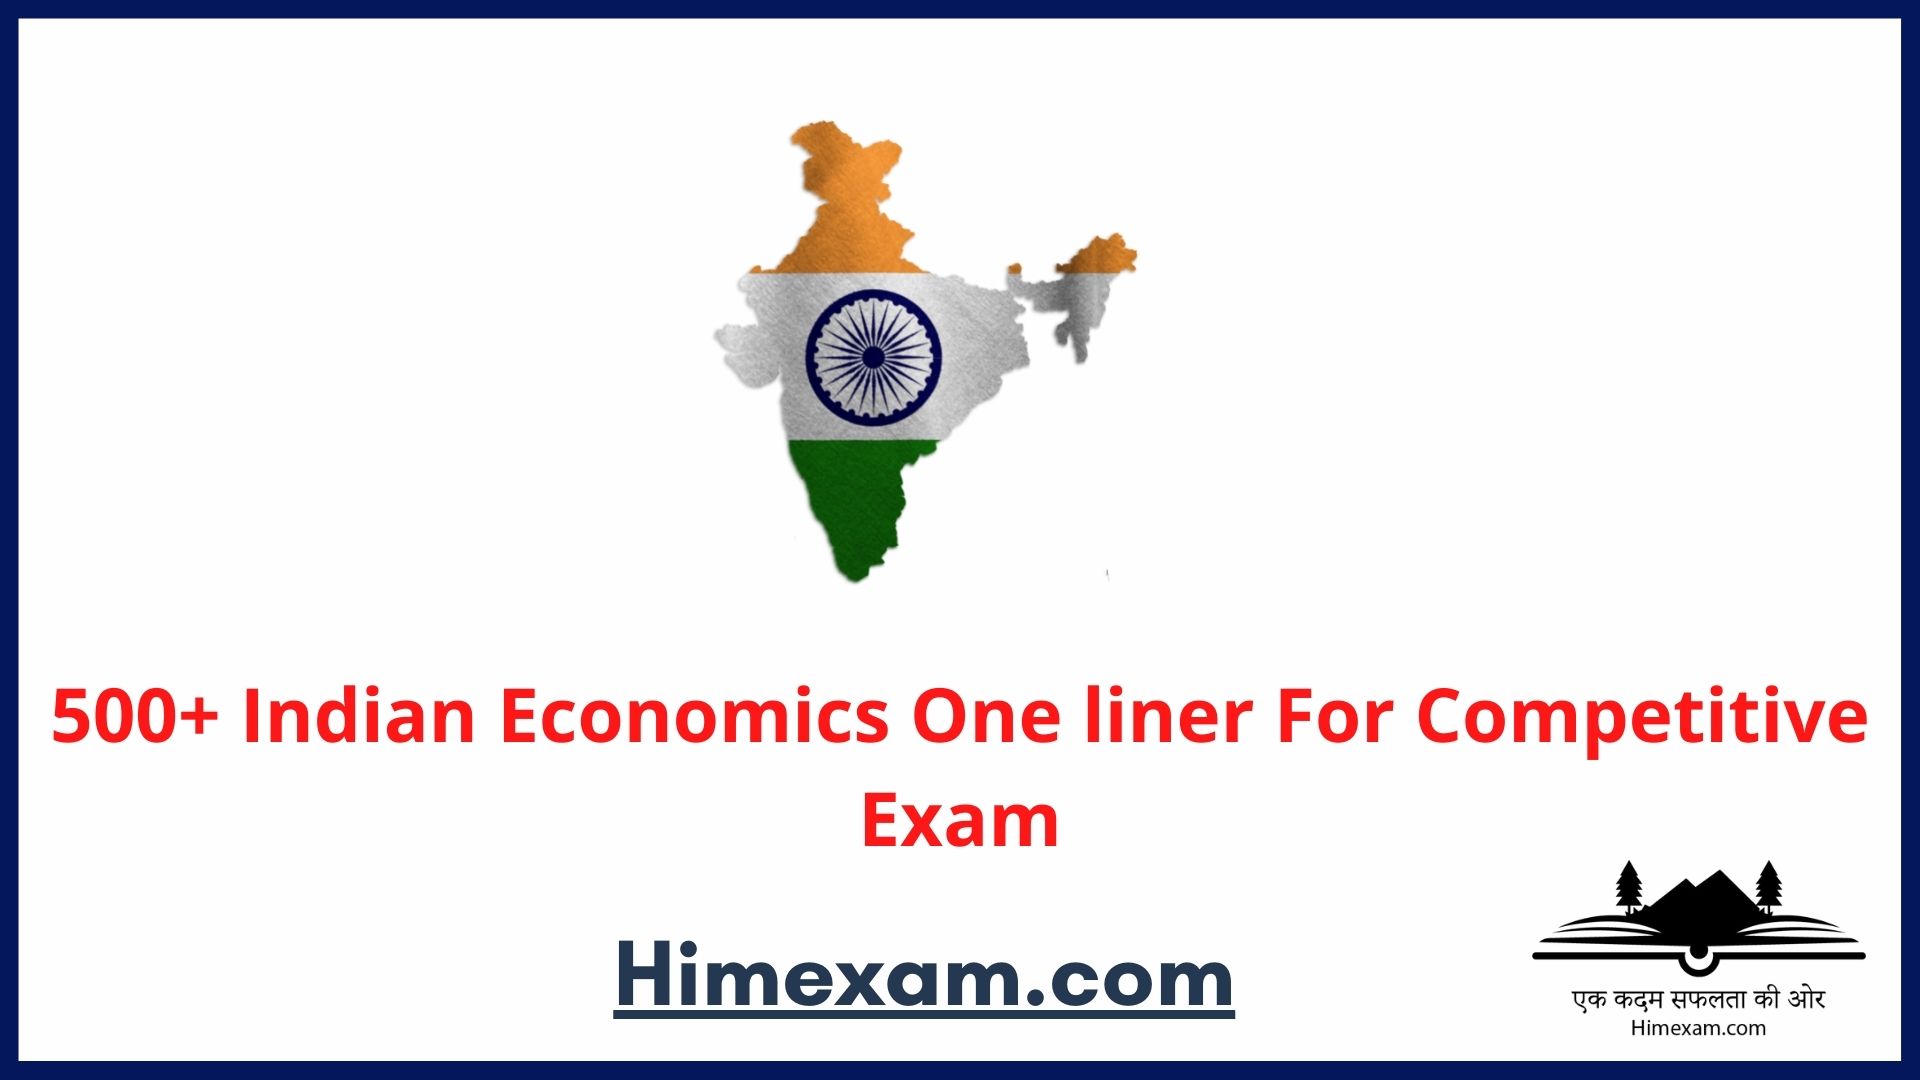 500+ Indian Economics One liner For Competitive Exam